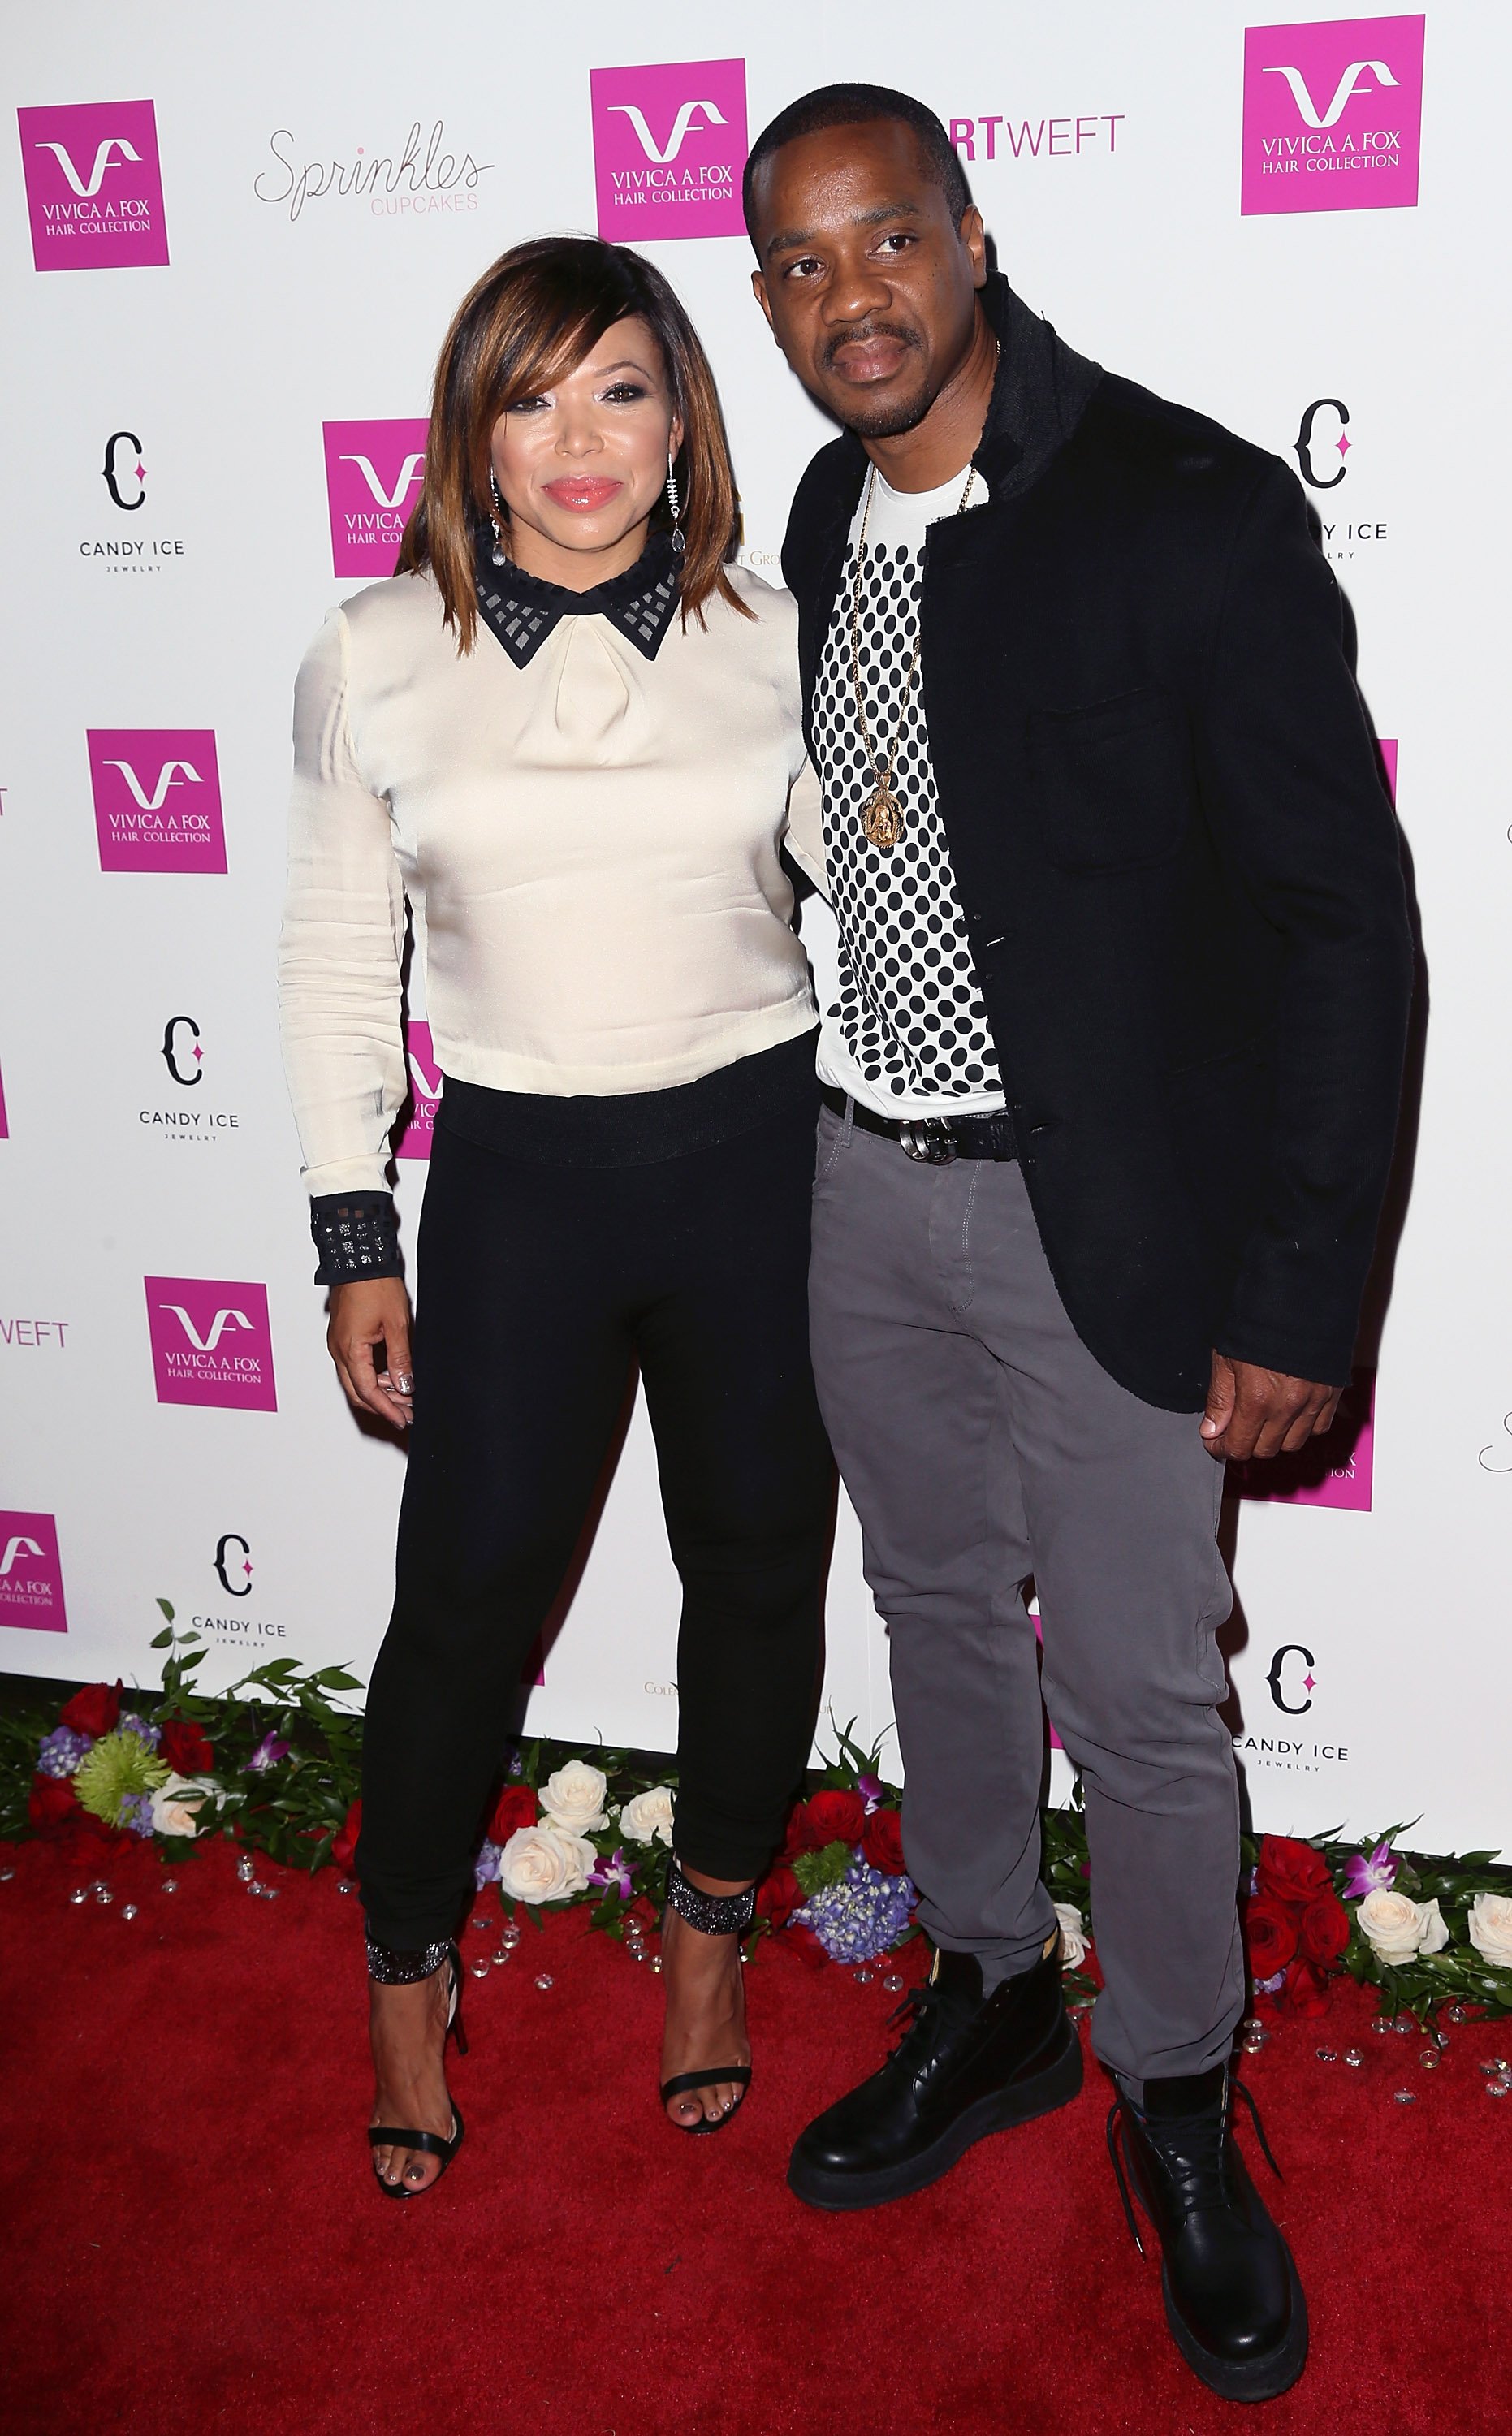 Tisha Campbell and Duane Martin attending the Vivica A. Fox 50th birthday celebration at Philippe Chow on August 2, 2014. | Photo: GettyImages